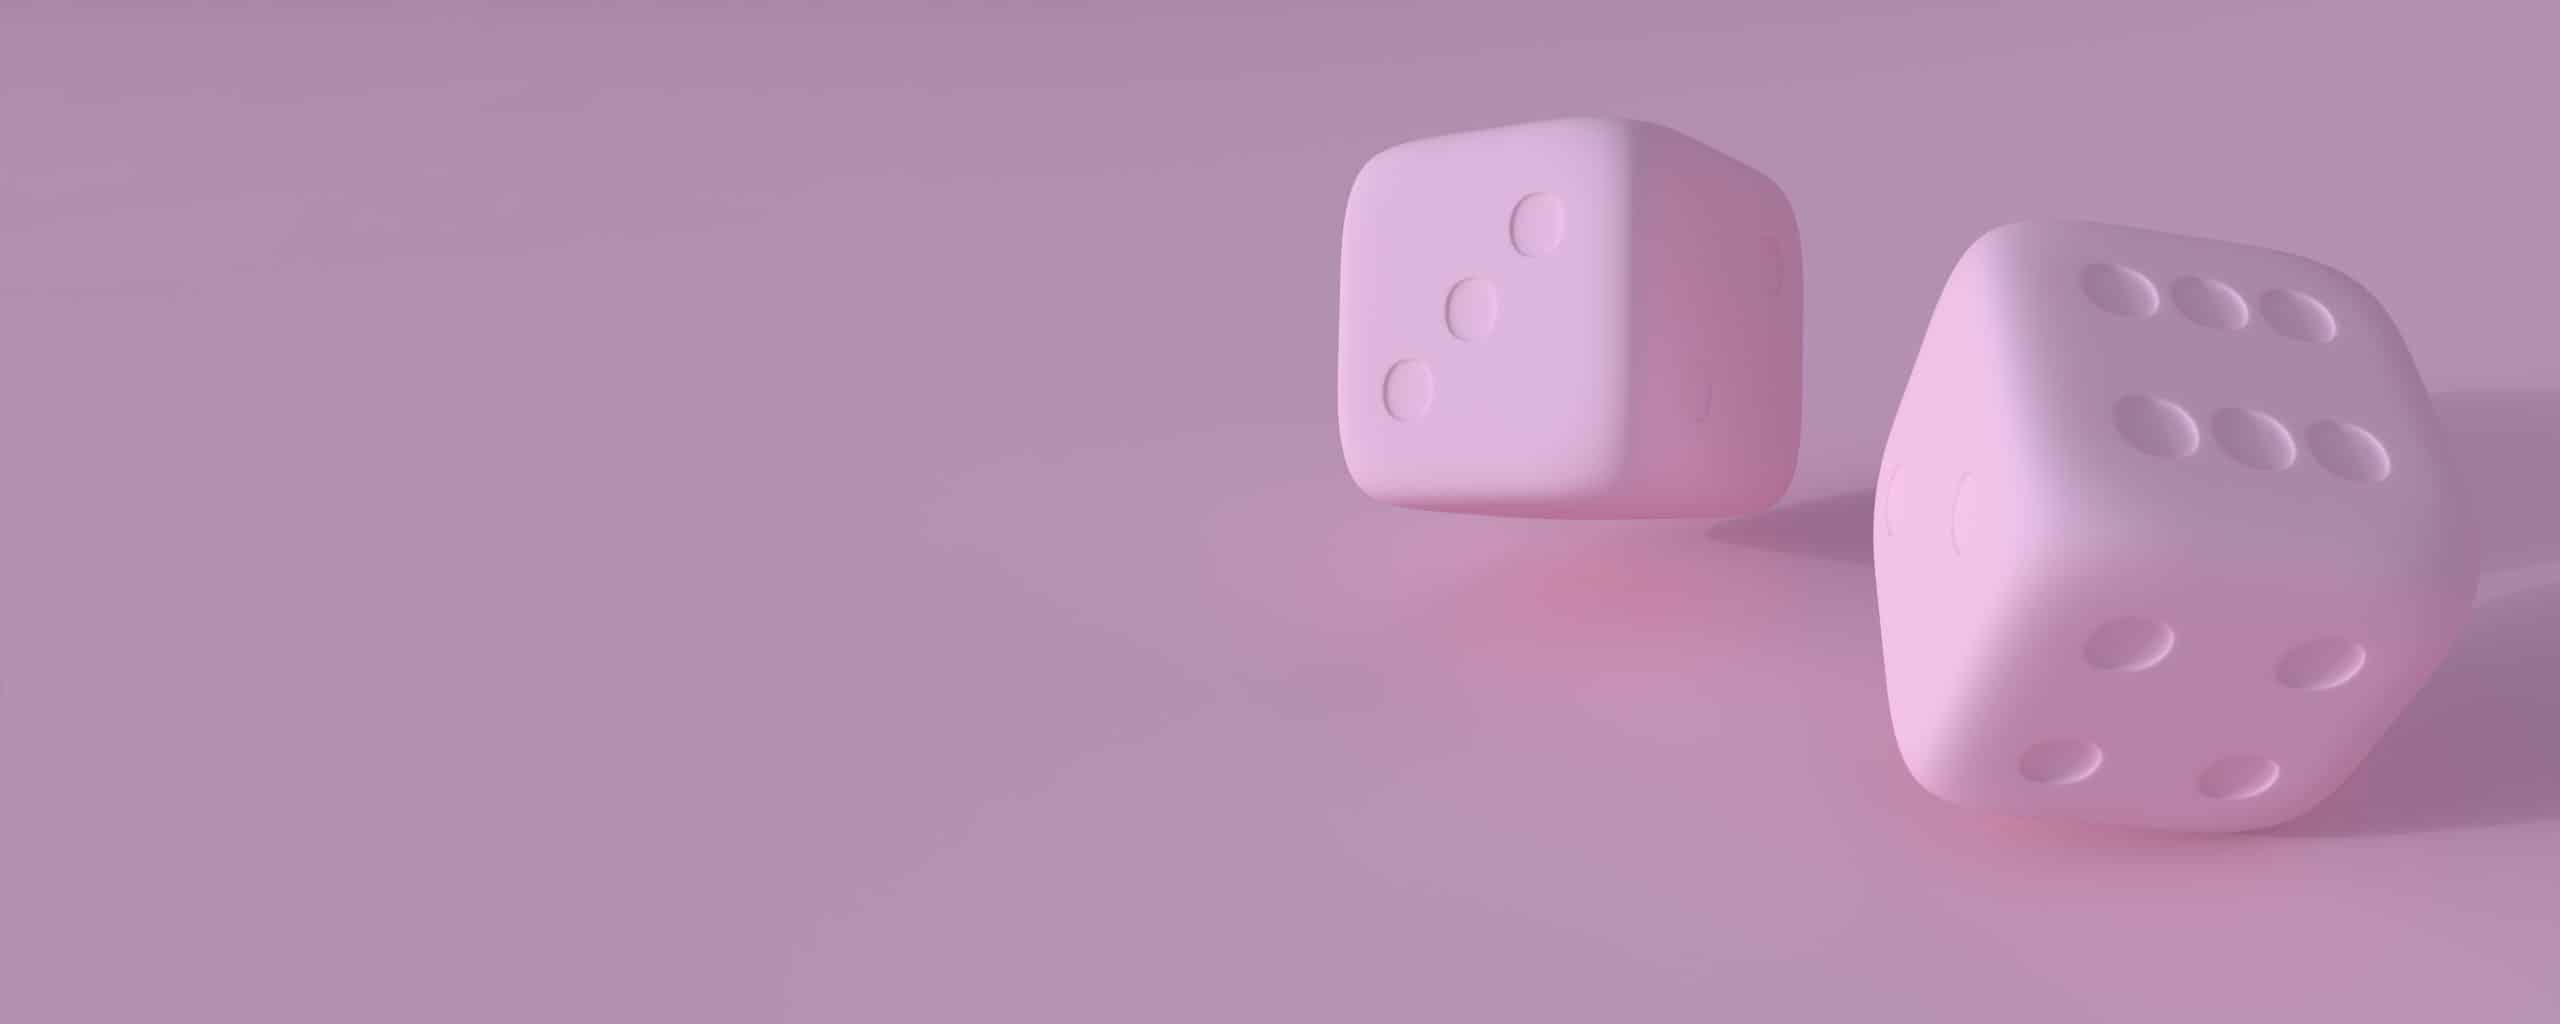 Two rolling dice, poker dice, ivories, bone, devil’s bones on bright background in purple pastel colors with copy space. Gaming and gambling. Random numbers. Luck and chance. 3D render illustration